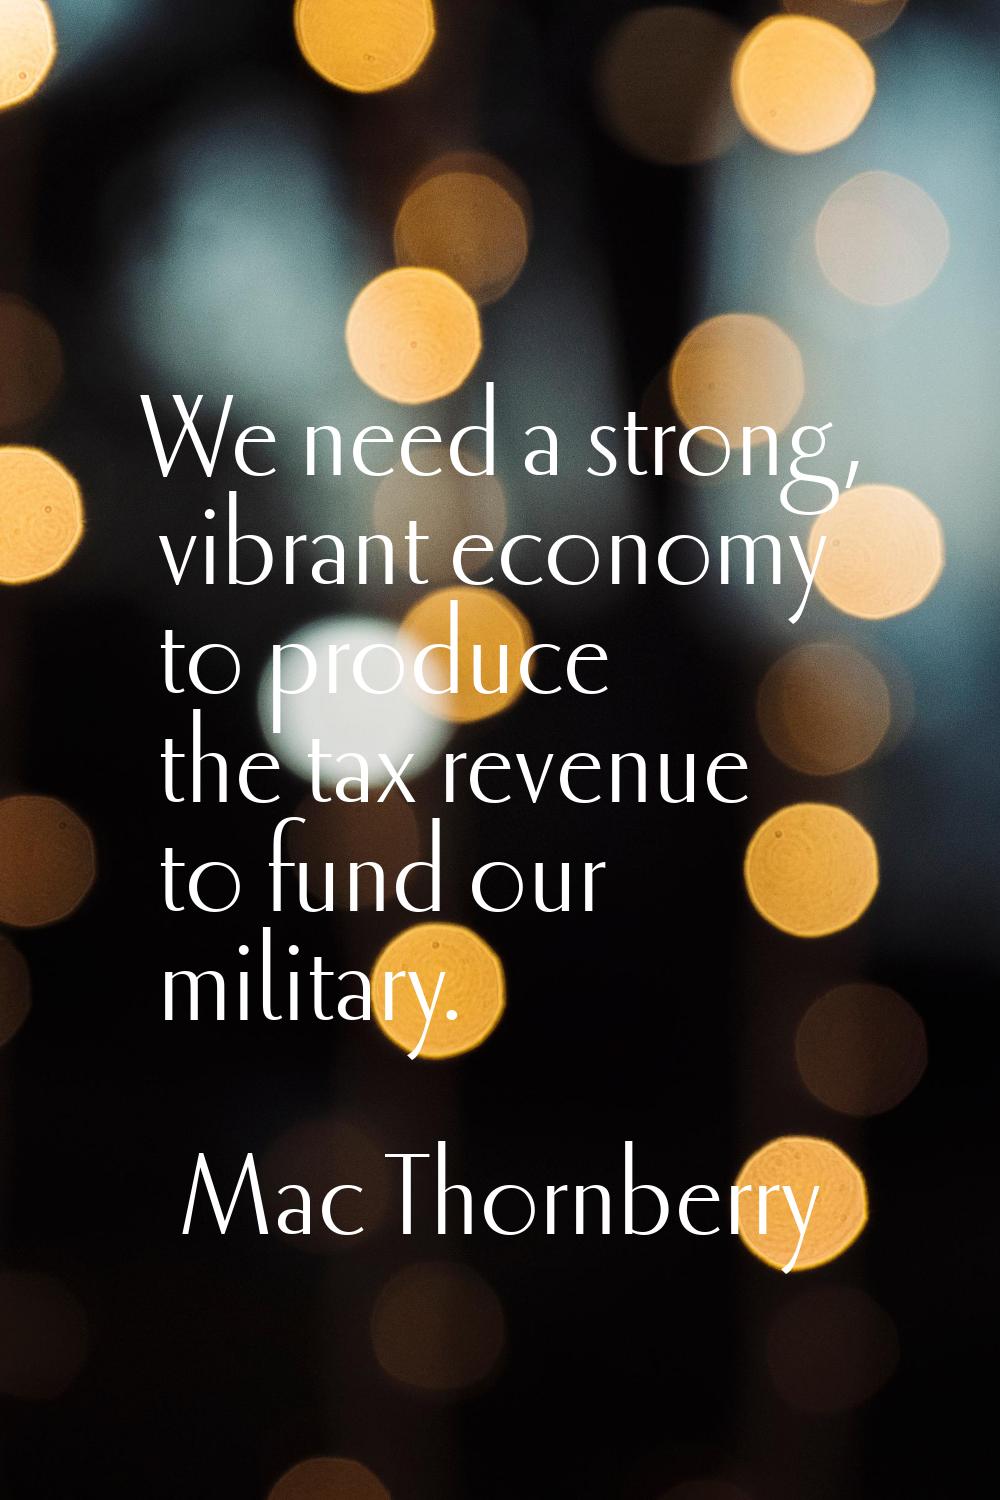 We need a strong, vibrant economy to produce the tax revenue to fund our military.